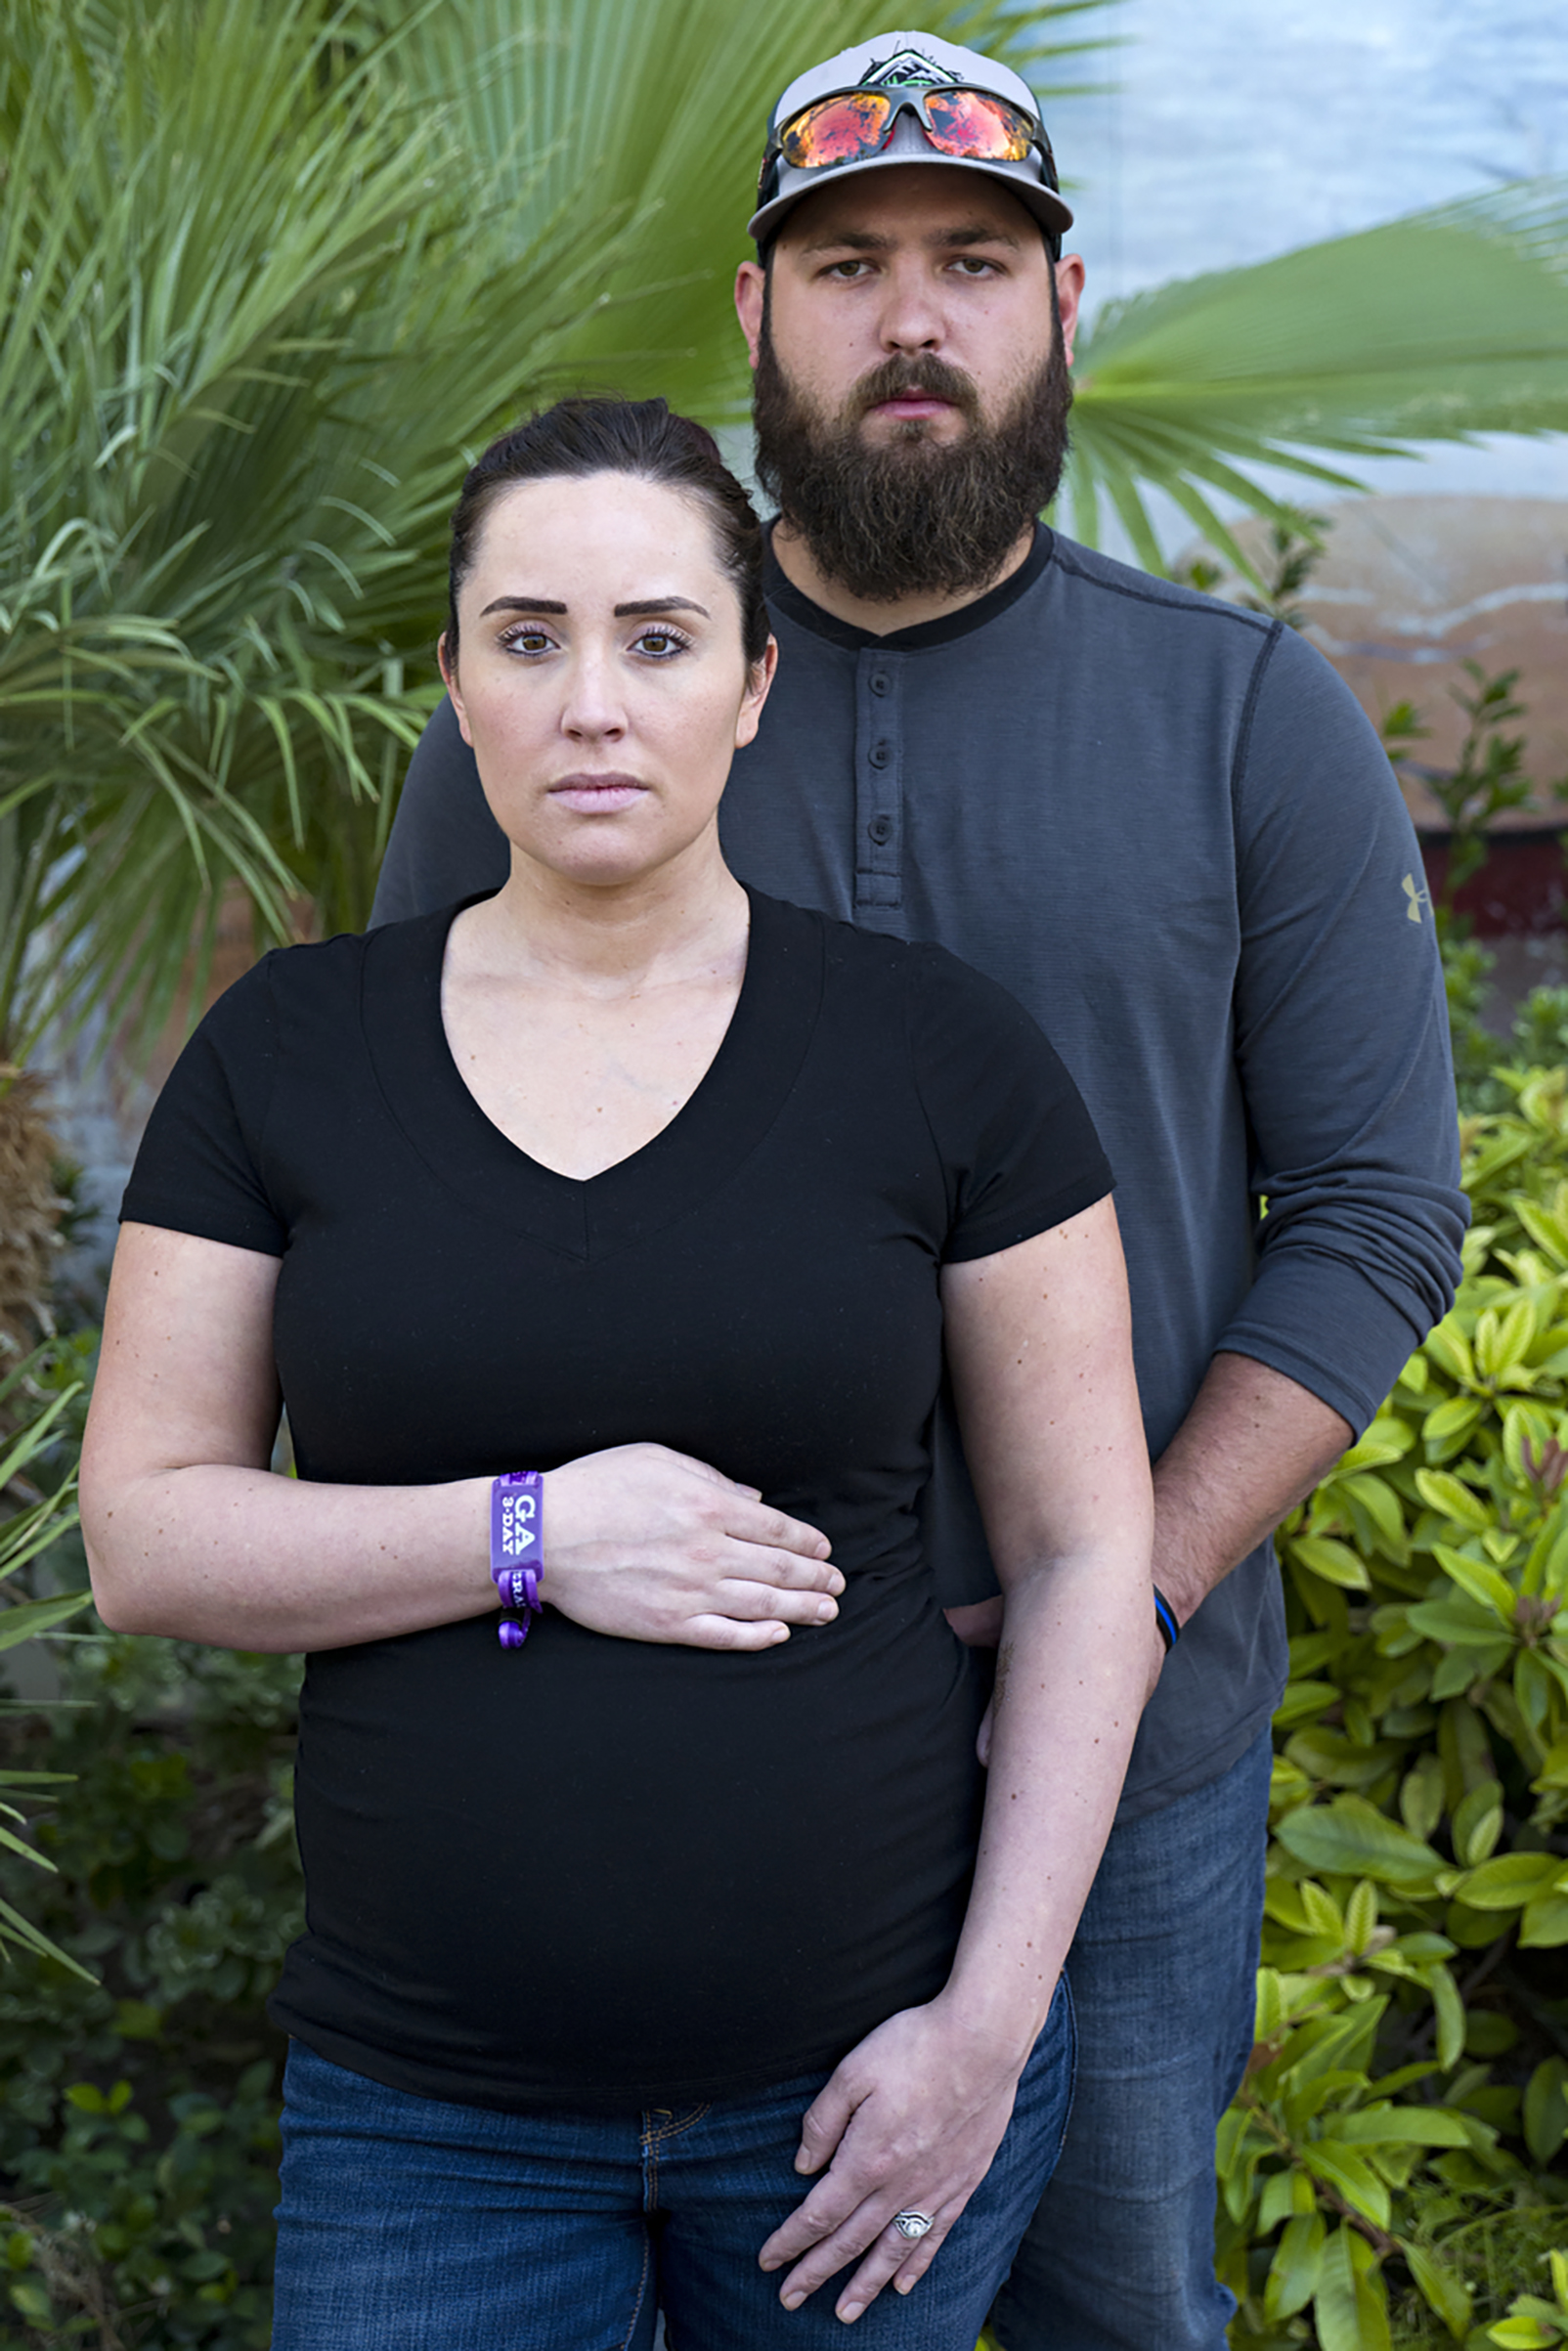 Survivors of the mass shooting, Kelsey Clark eight-months pregnant poses for a portrait with her husband Toby Clark, Las Vegas, Oct. 3, 2017.